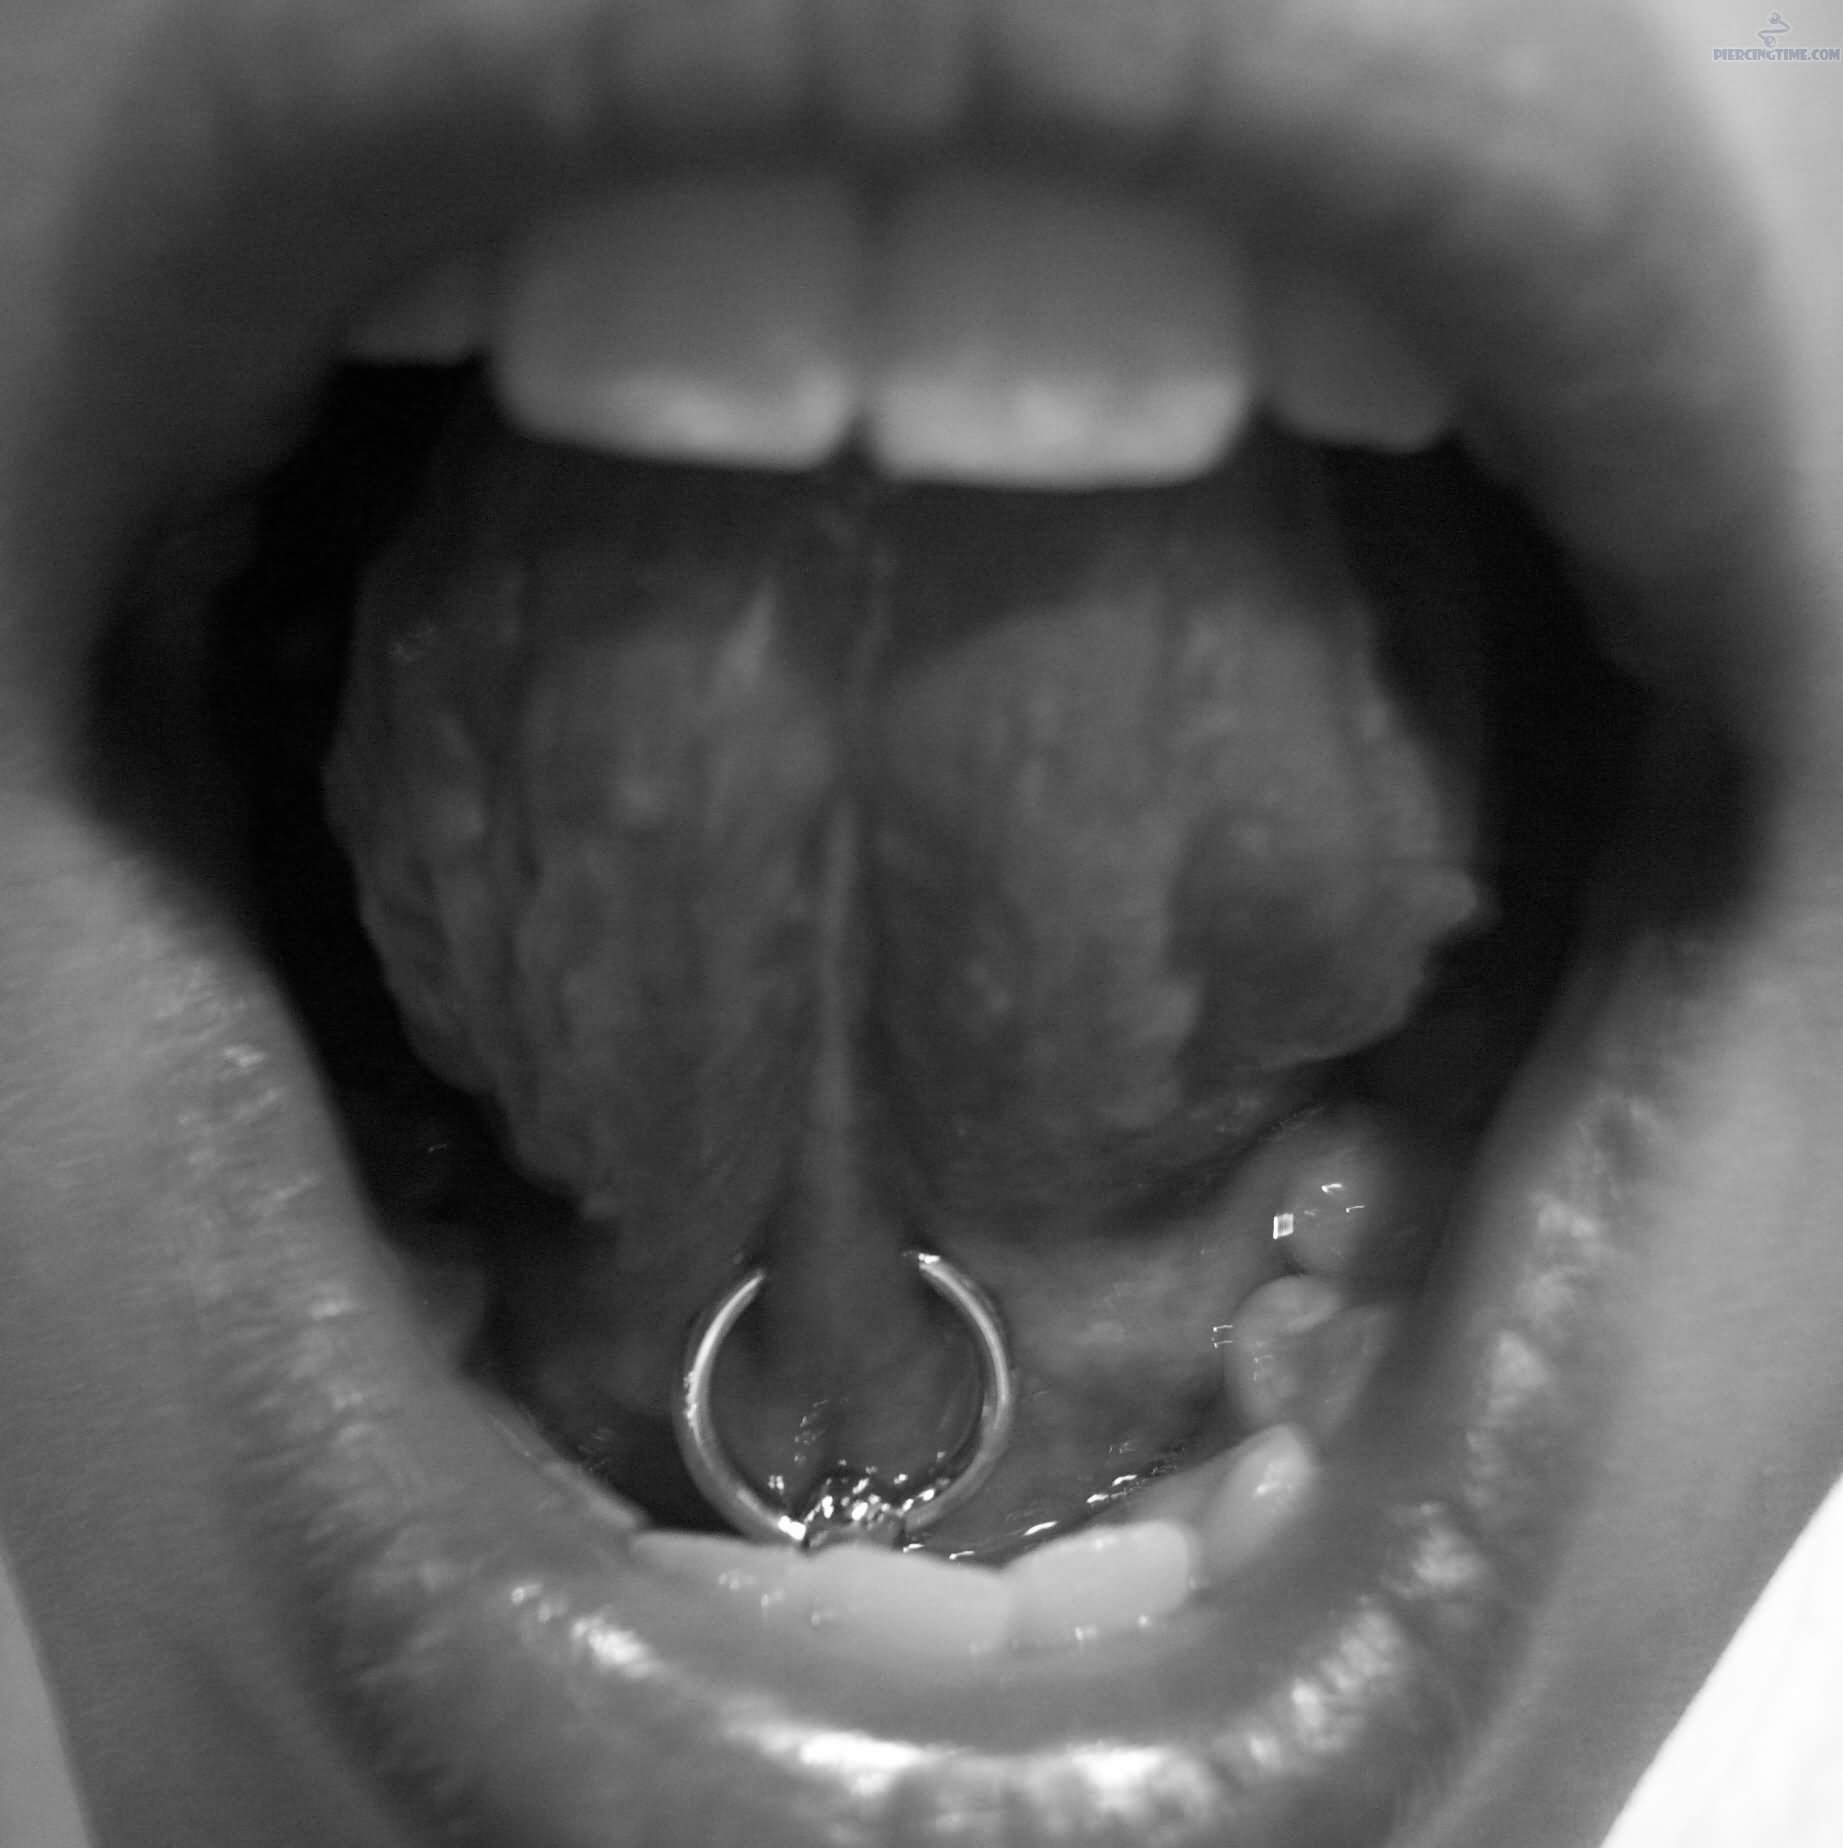 Frenulum Piercing With Silver Bead Ring